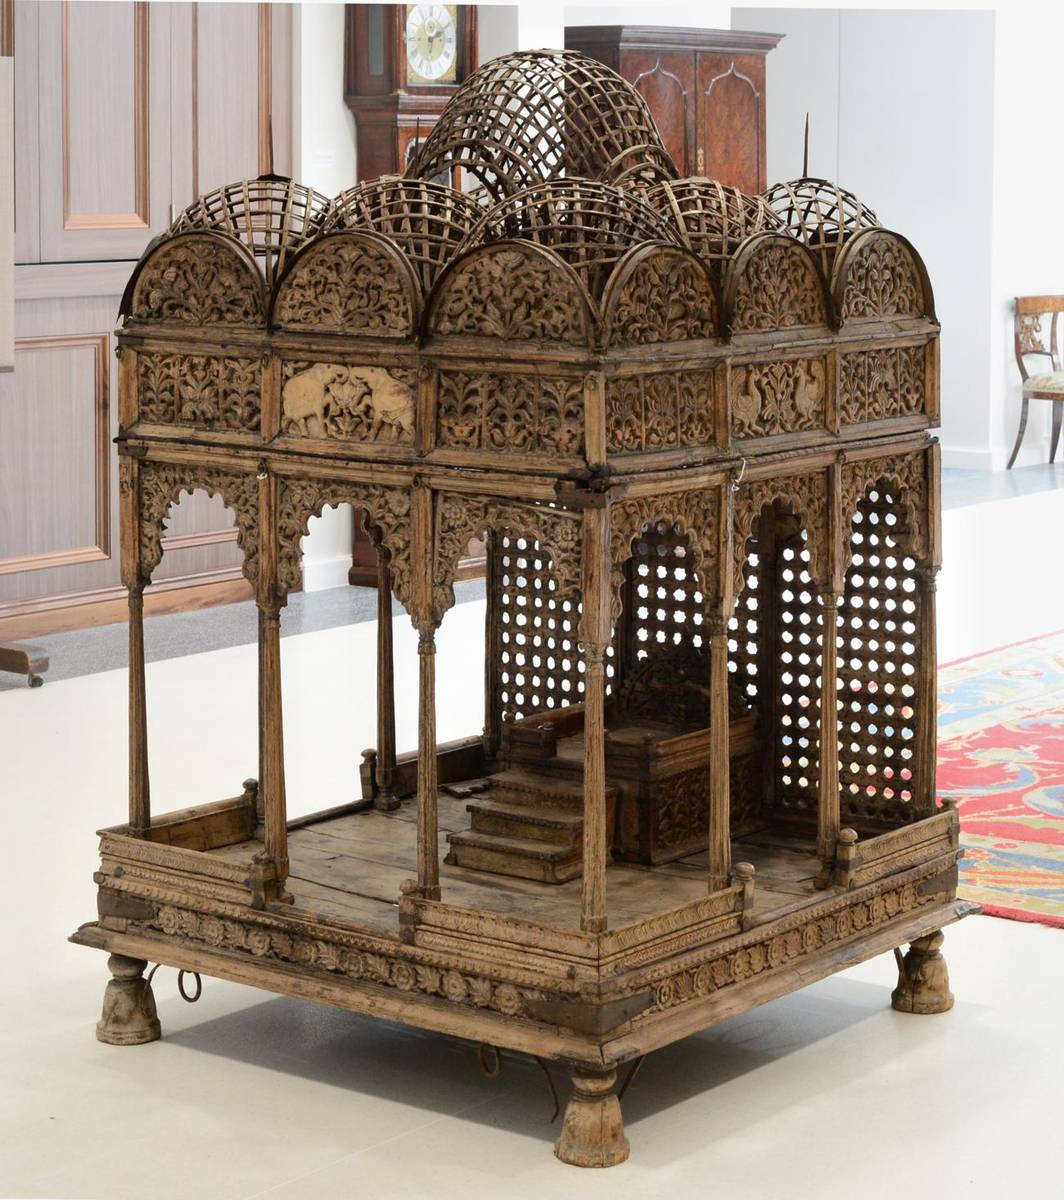 Lot 128 - An Indian Carved Teak Shrine, probably 17th century, in the form of a miniature temple, the...